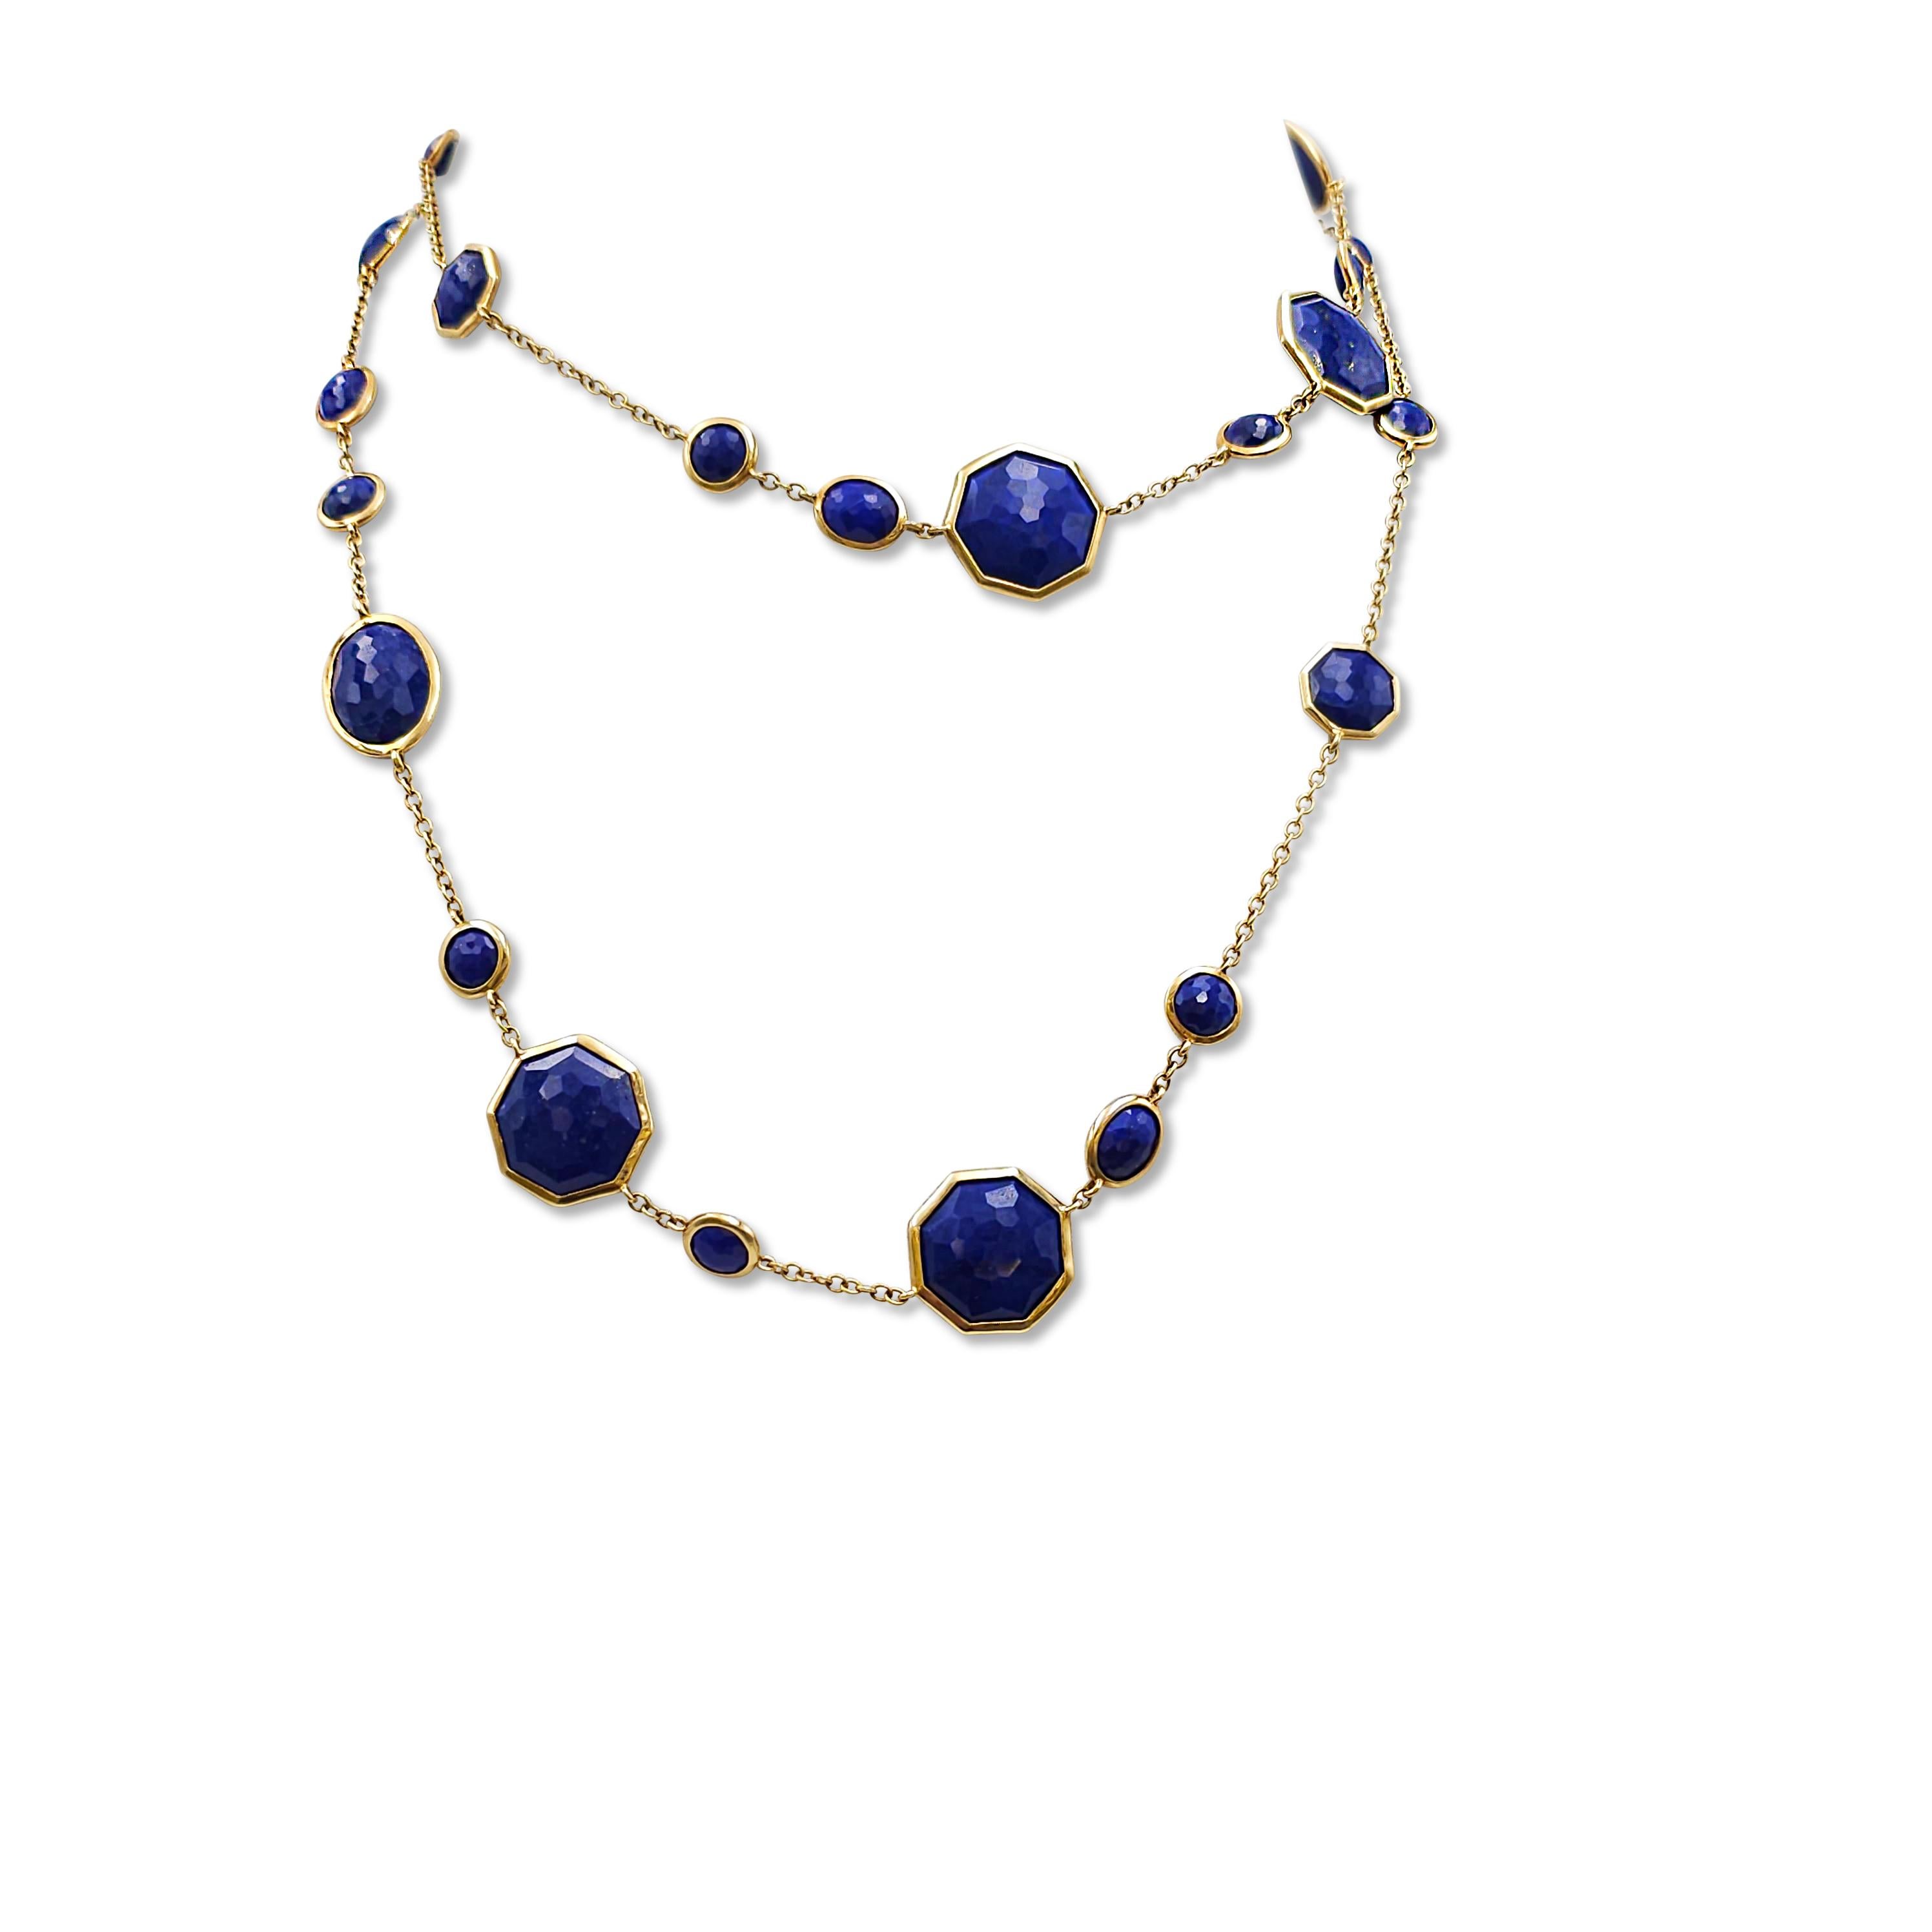 Authentic Ippolita Lollipop necklace from the Rock Candy collection crafted in 18 karat yellow gold.  Featuring a playful mix of stations of faceted round and octagonal shaped lapis of varying sizes bezel set in high polished gold.  The necklace